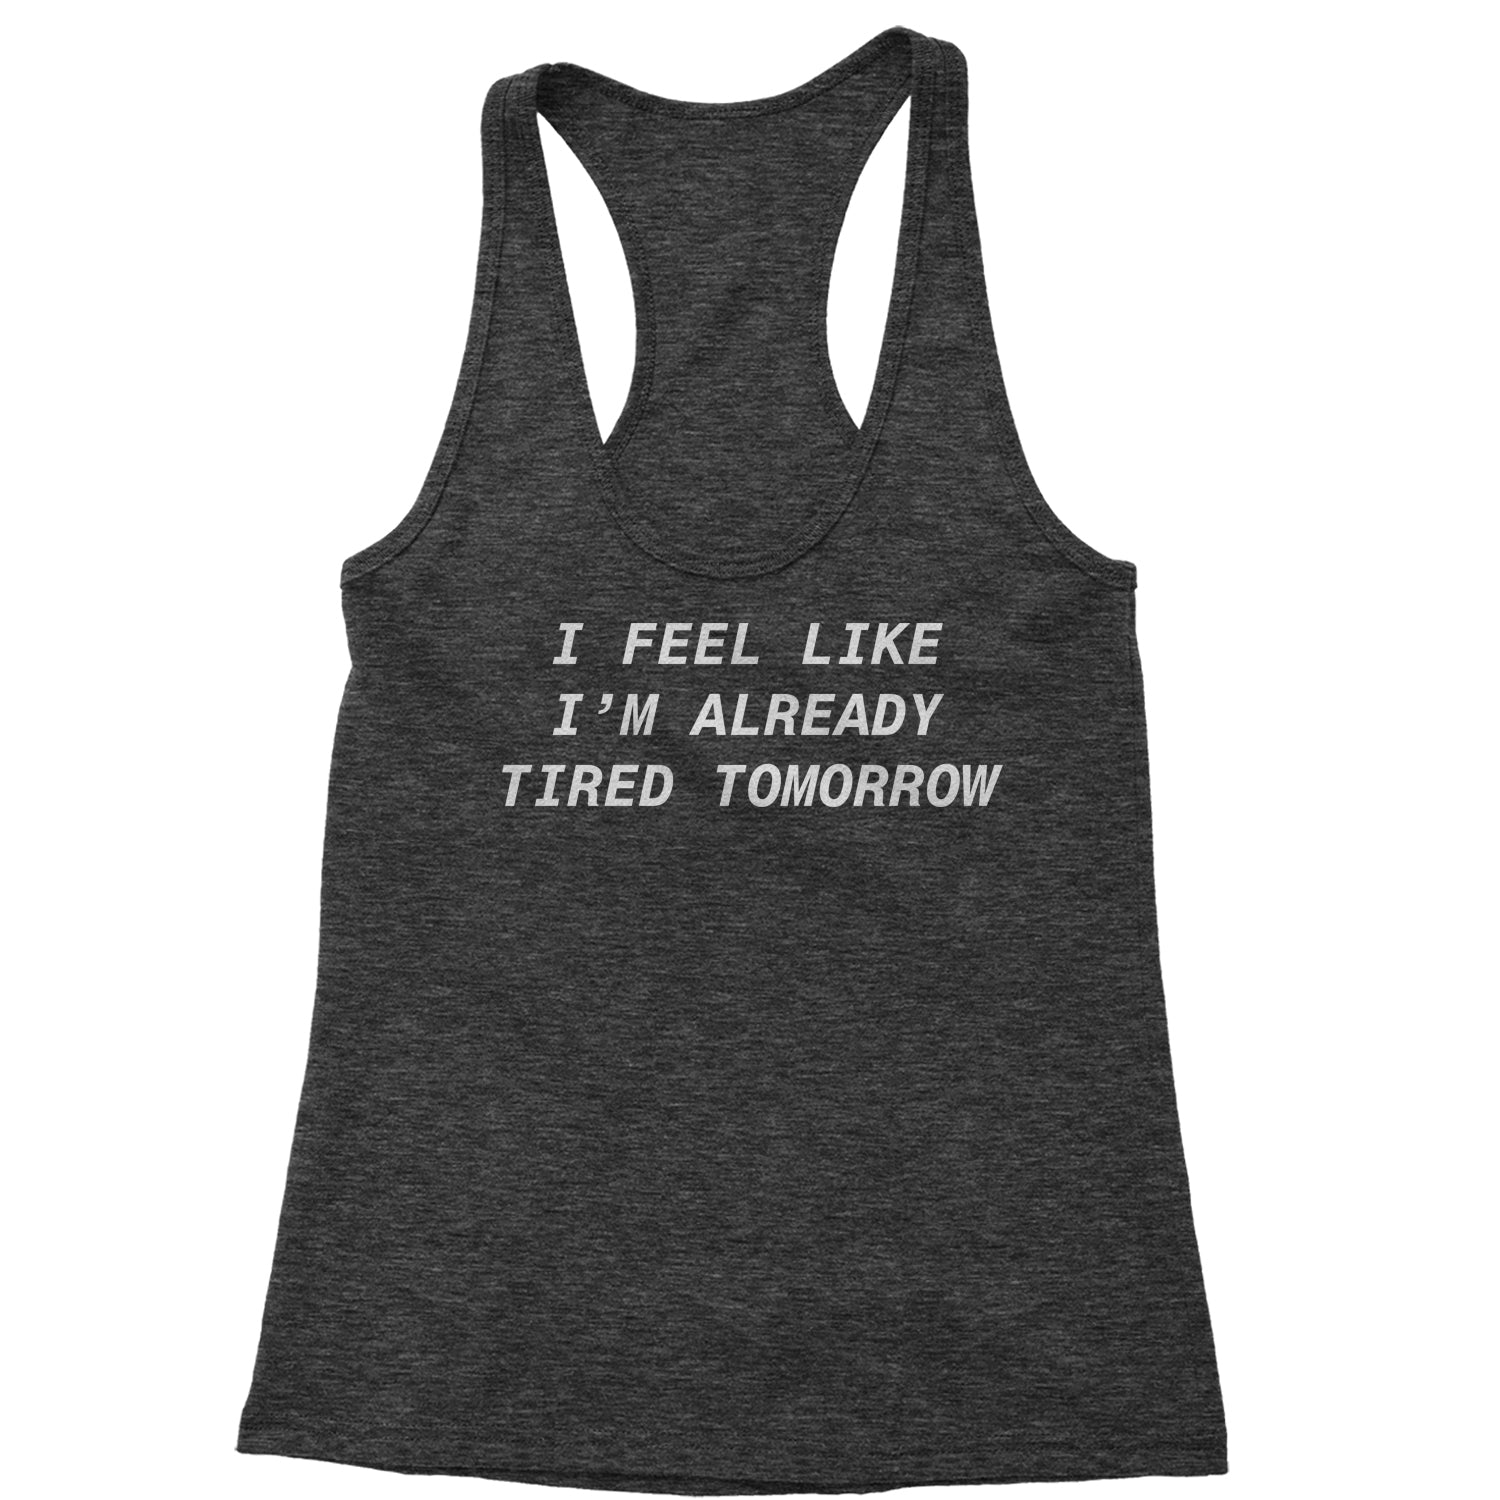 I Feel Like I'm Already Tired Tomorrow Racerback Tank Top for Women #expressiontees by Expression Tees